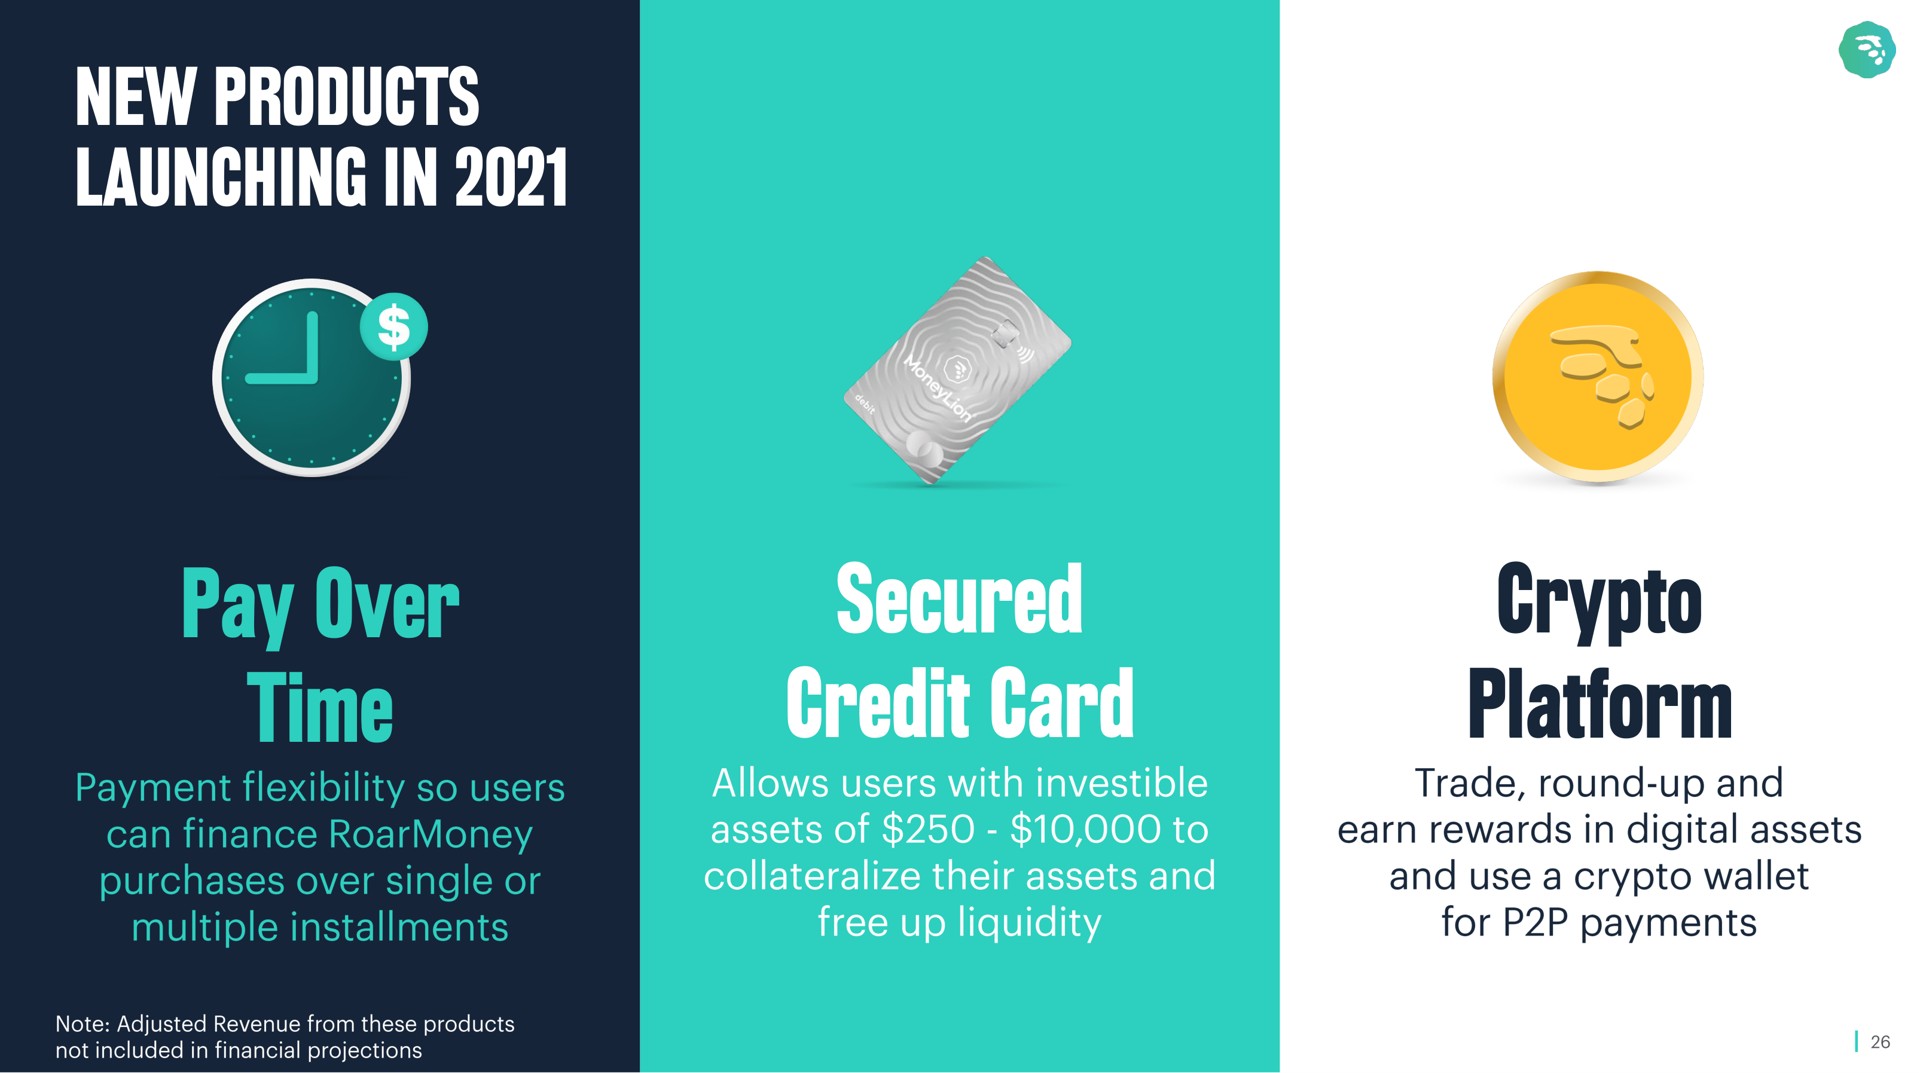 new products launching in pay over time secured credit card platform | MoneyLion